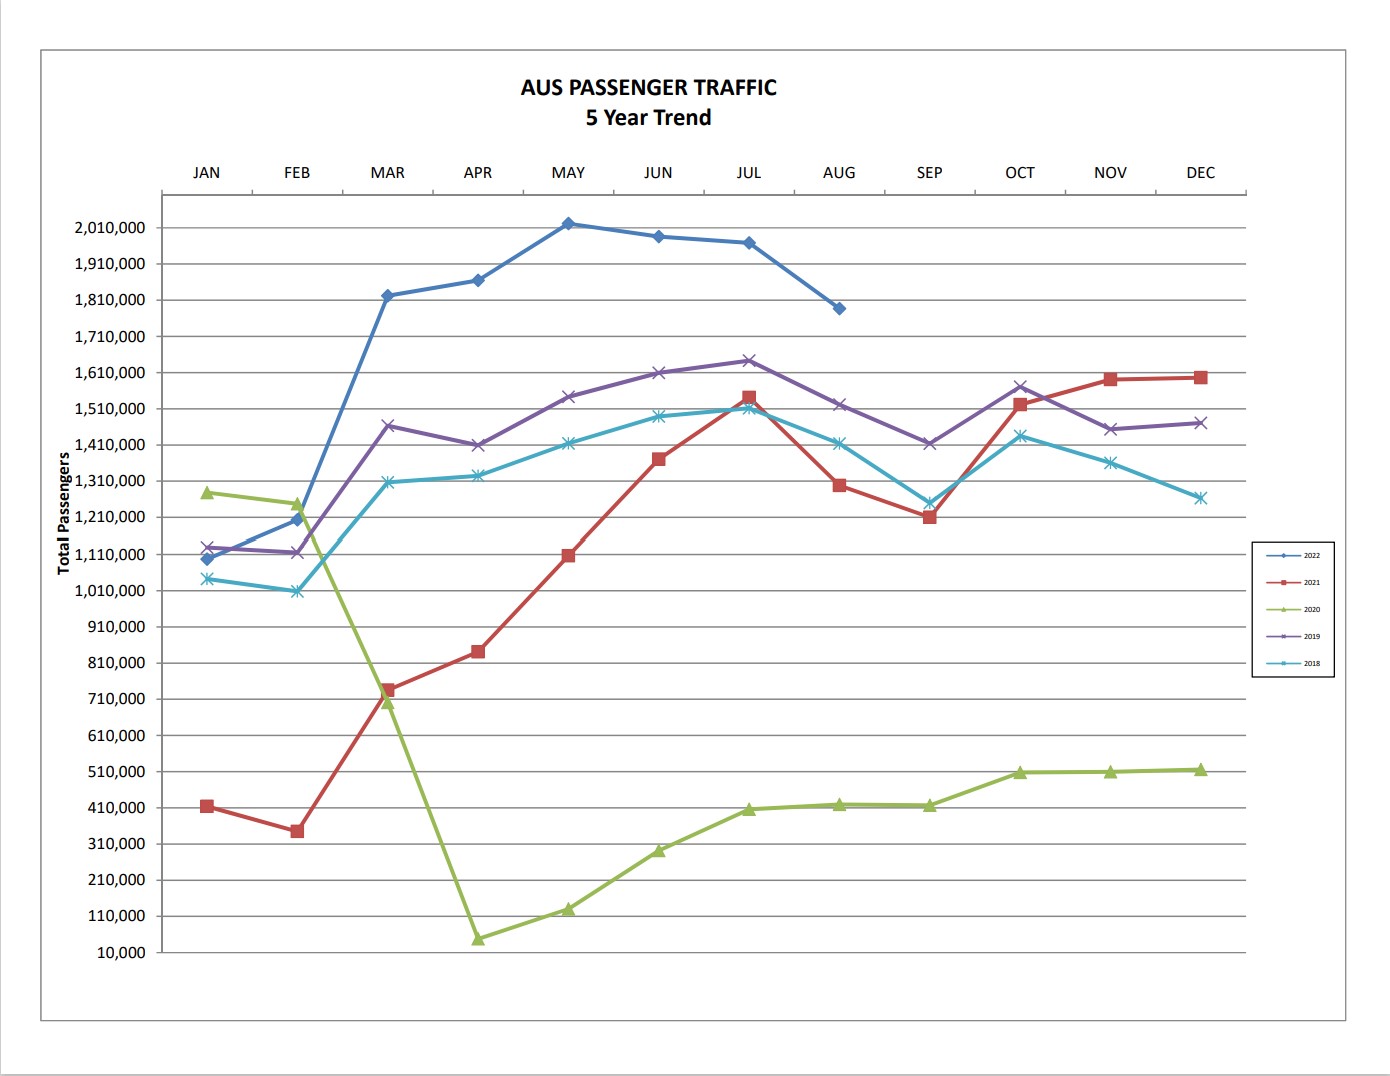 A graph that shows AUS passenger growth over the past 5 years by month